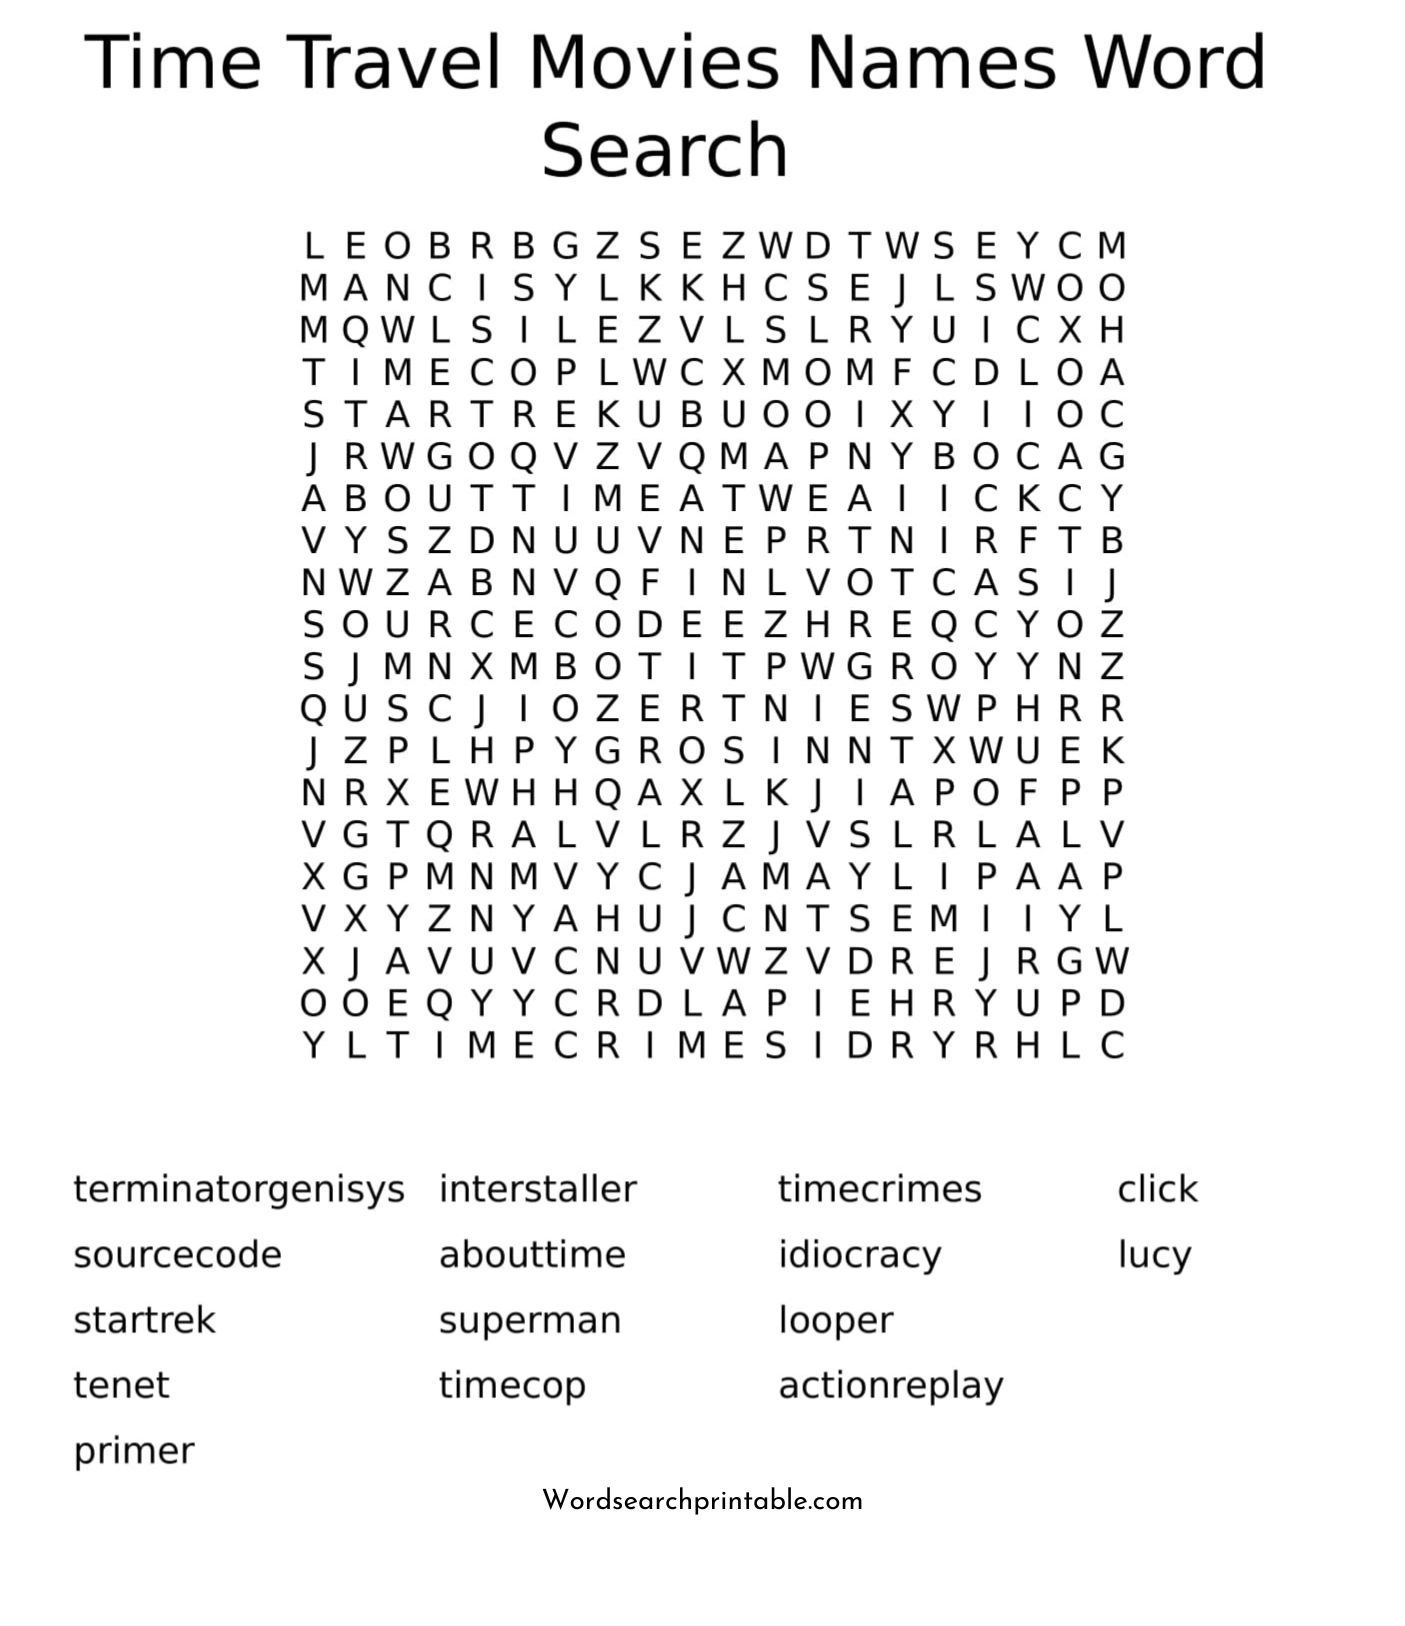 time travel movies names word search puzzle